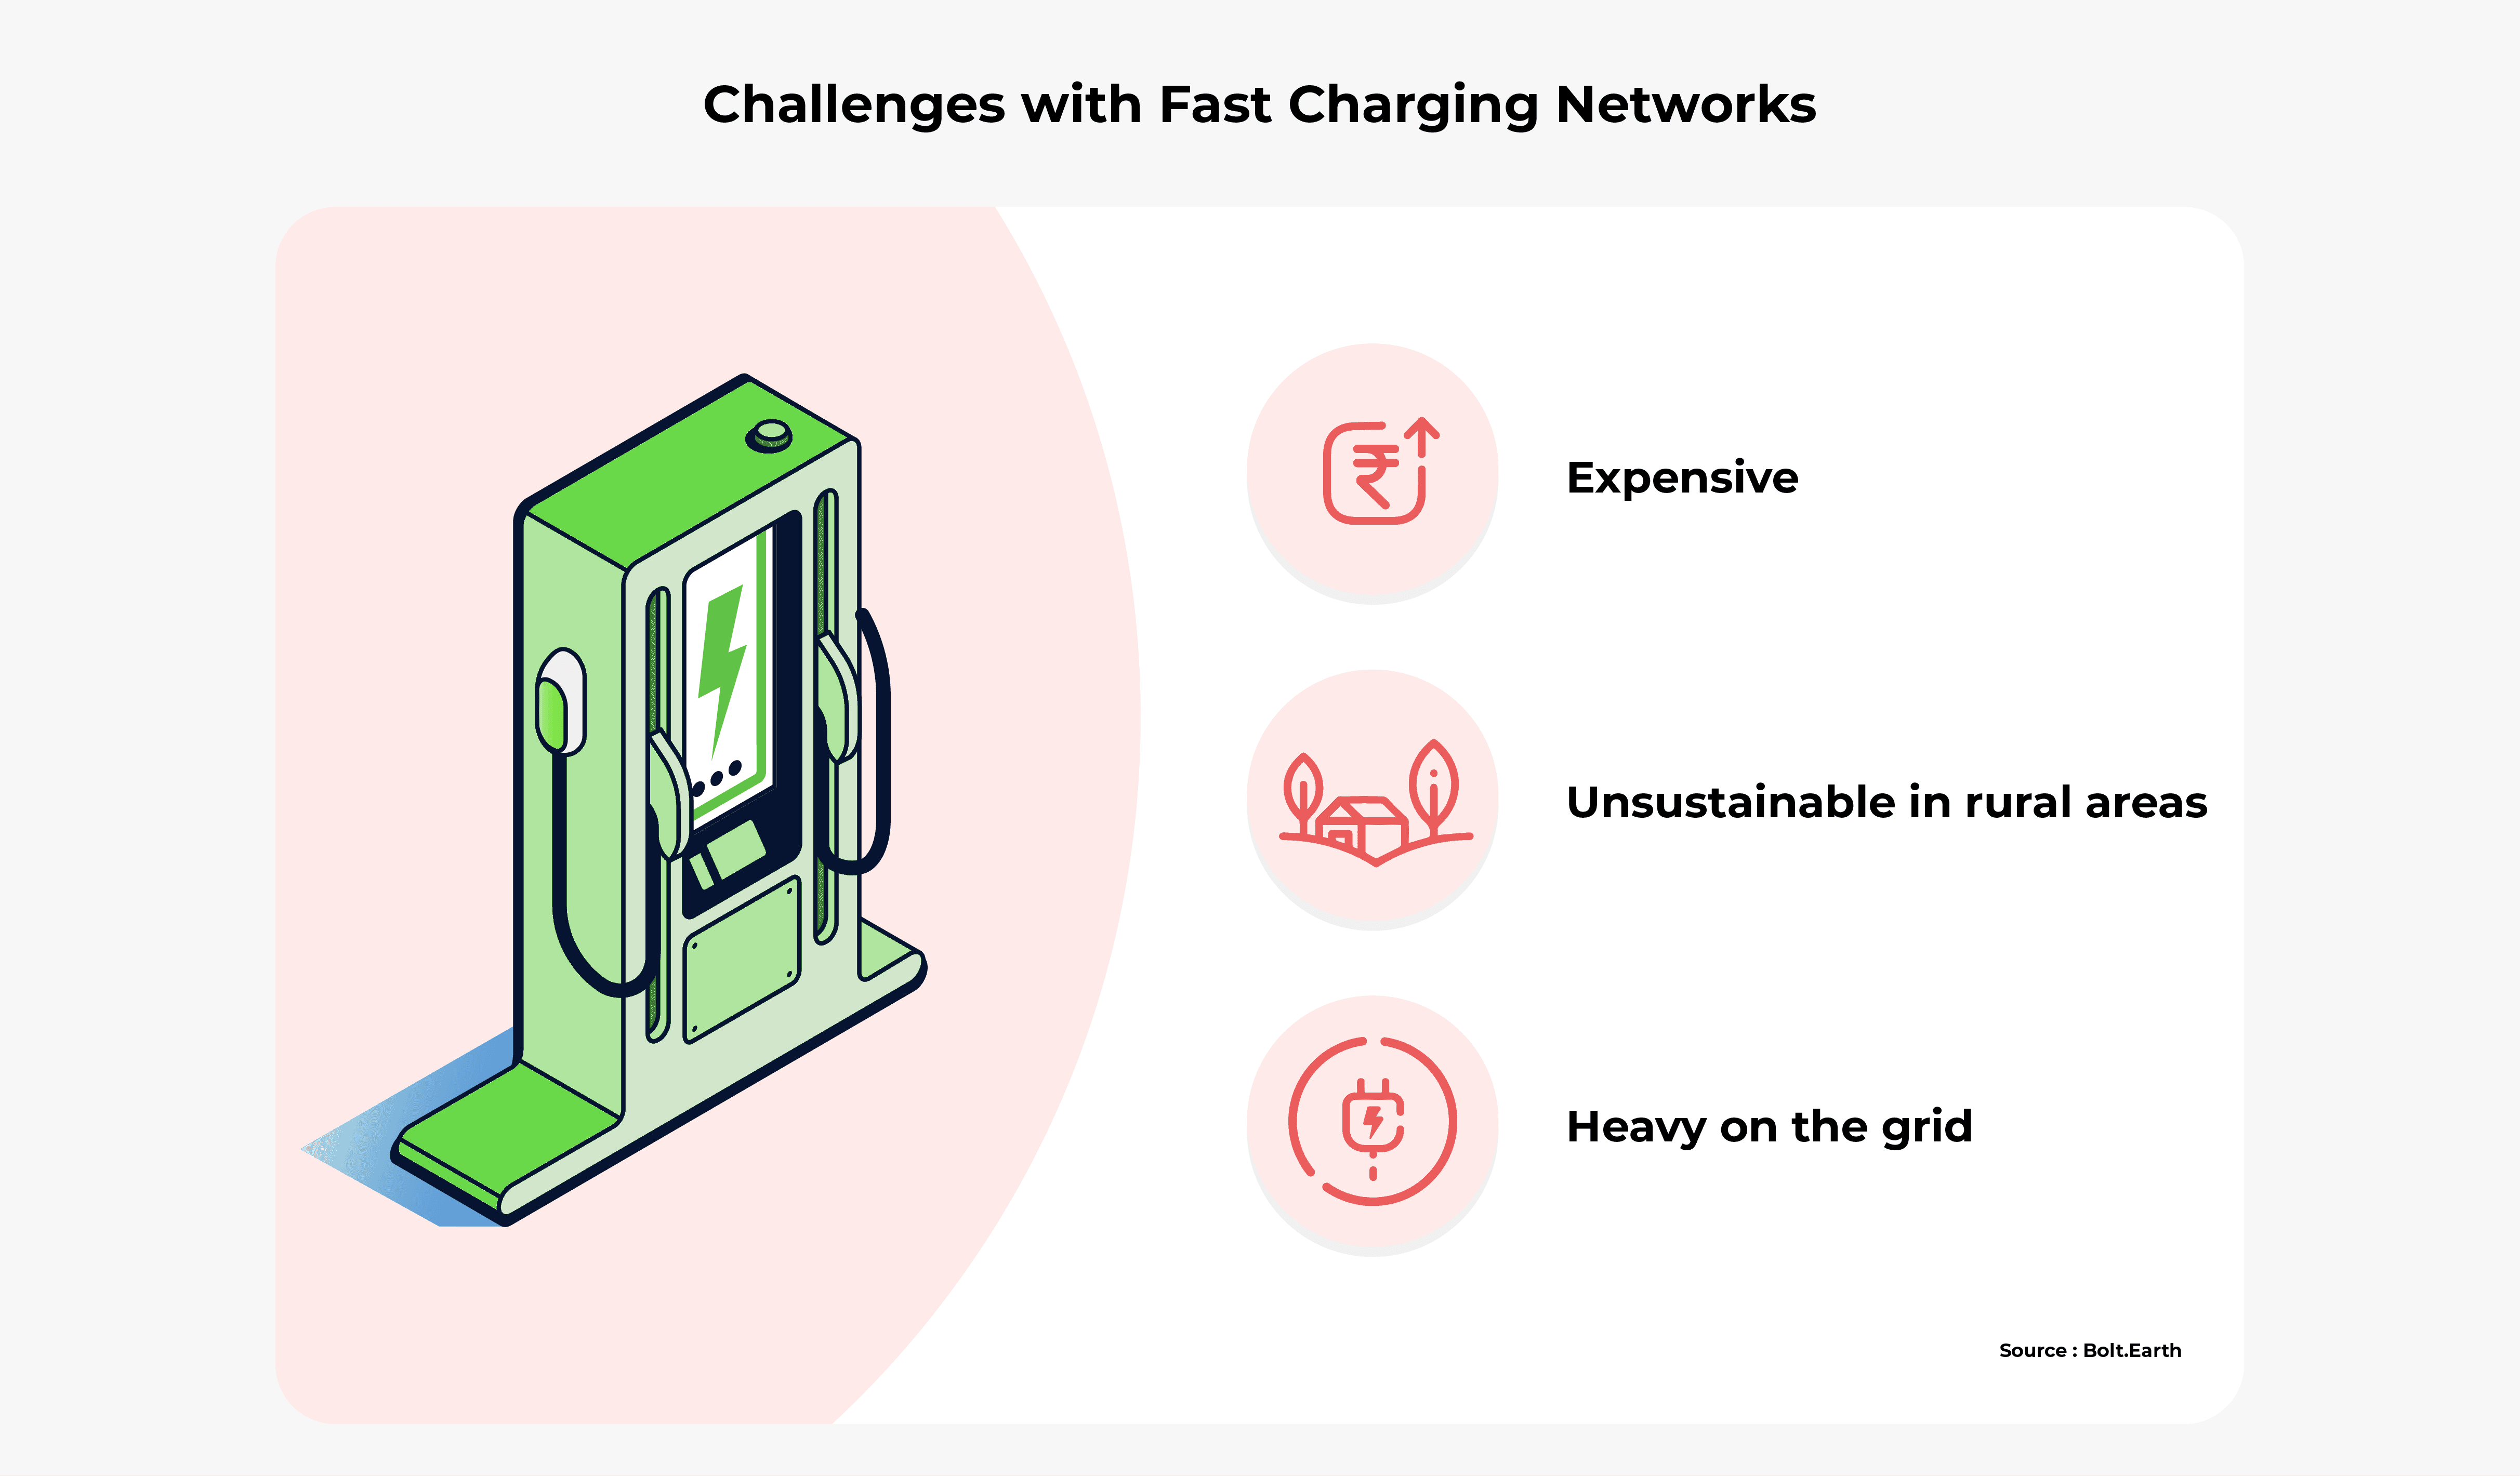 Infographic of three main challenges with fast charging networks: they're expensive, unsustainable in rural areas, and heavy on the grid.